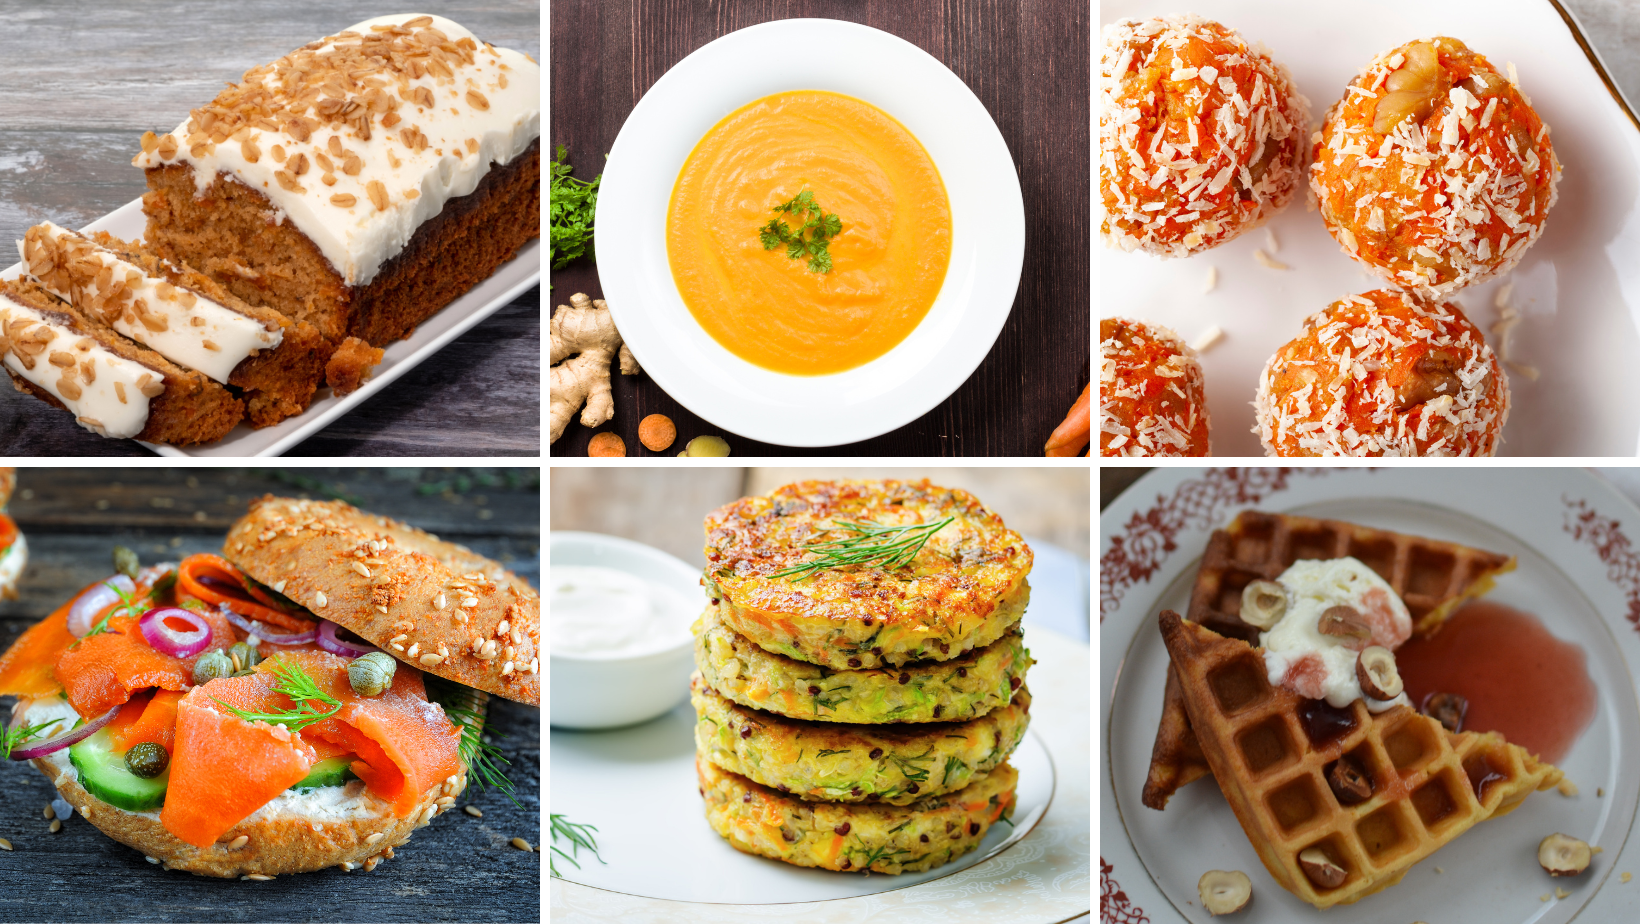 7 Most Delicious Vegan Carrot Recipes For Your Kids